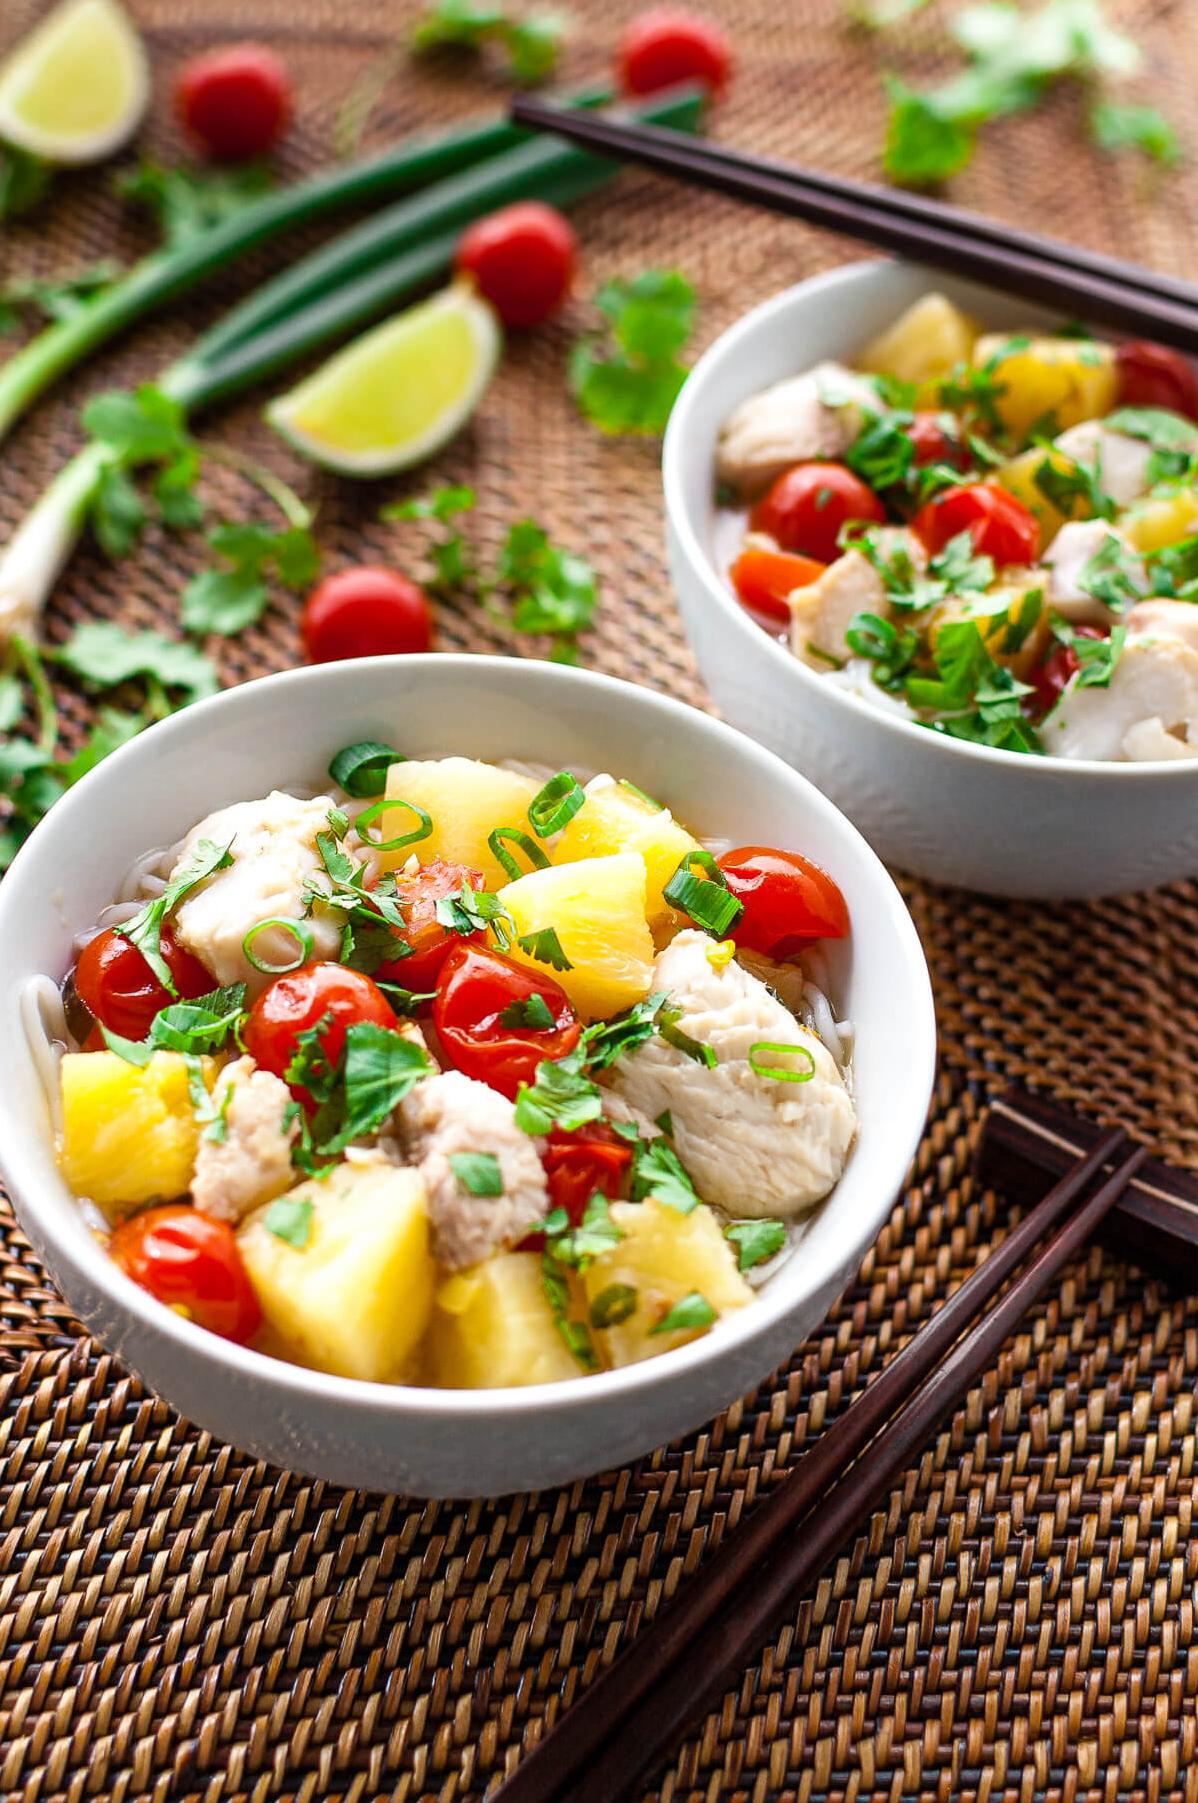  The chunks of juicy tomatoes and tender fish bring an explosion of color to your dish!